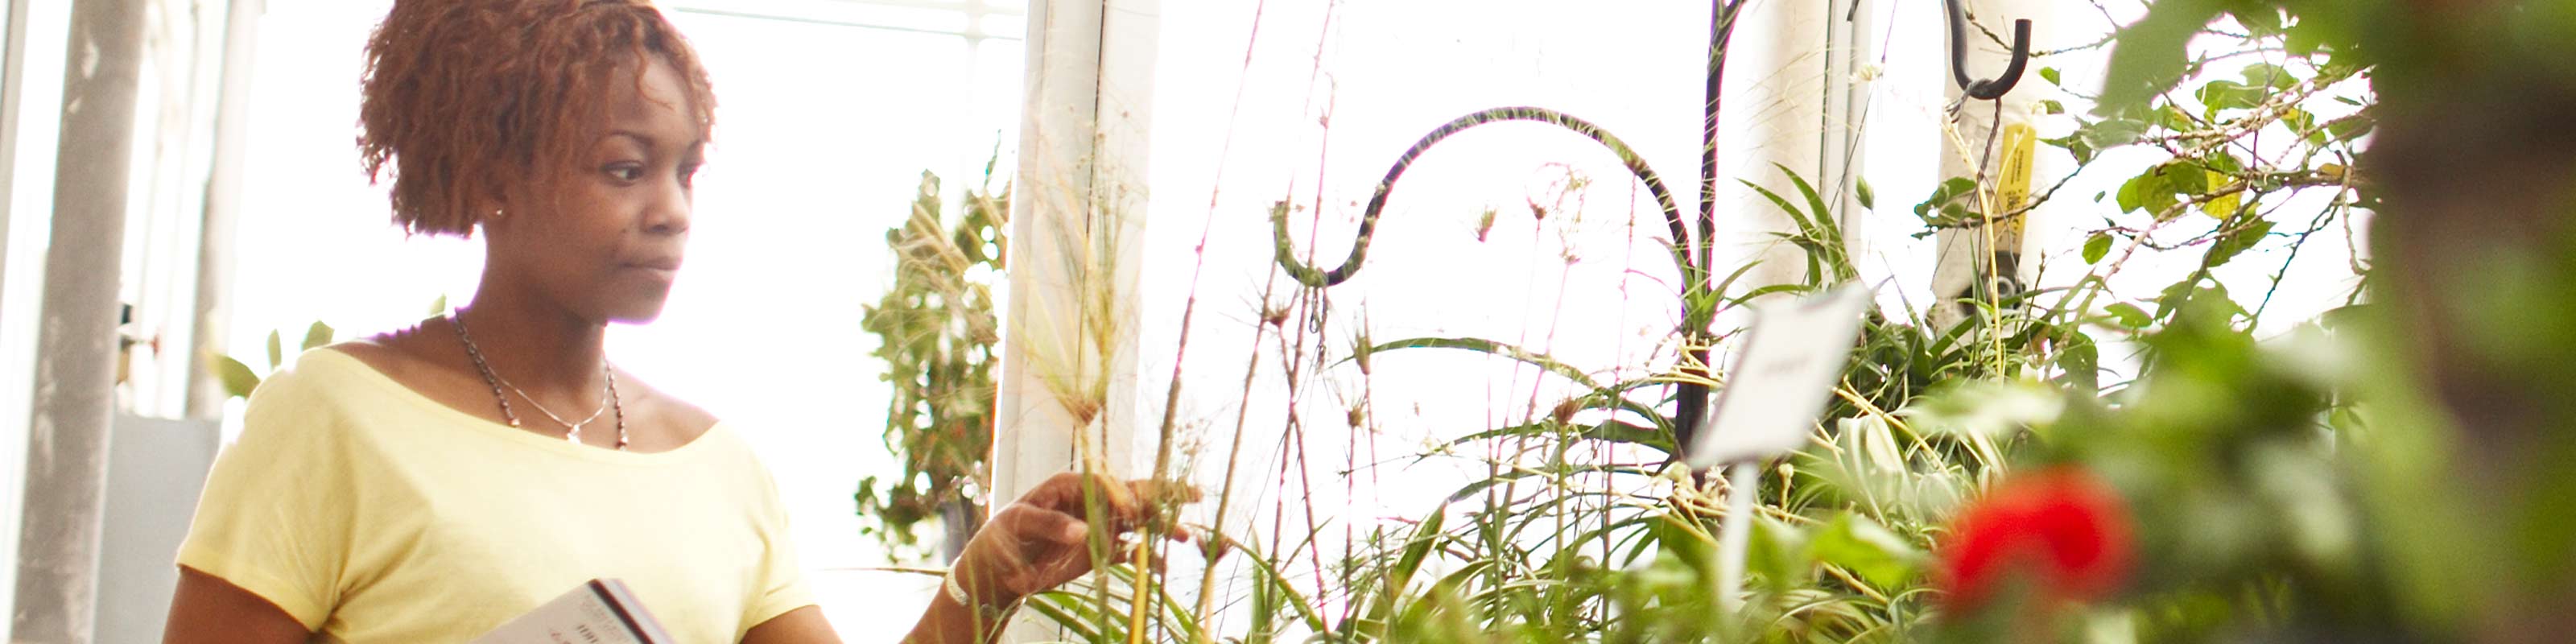 Woman inspecting plants in Greenhouse